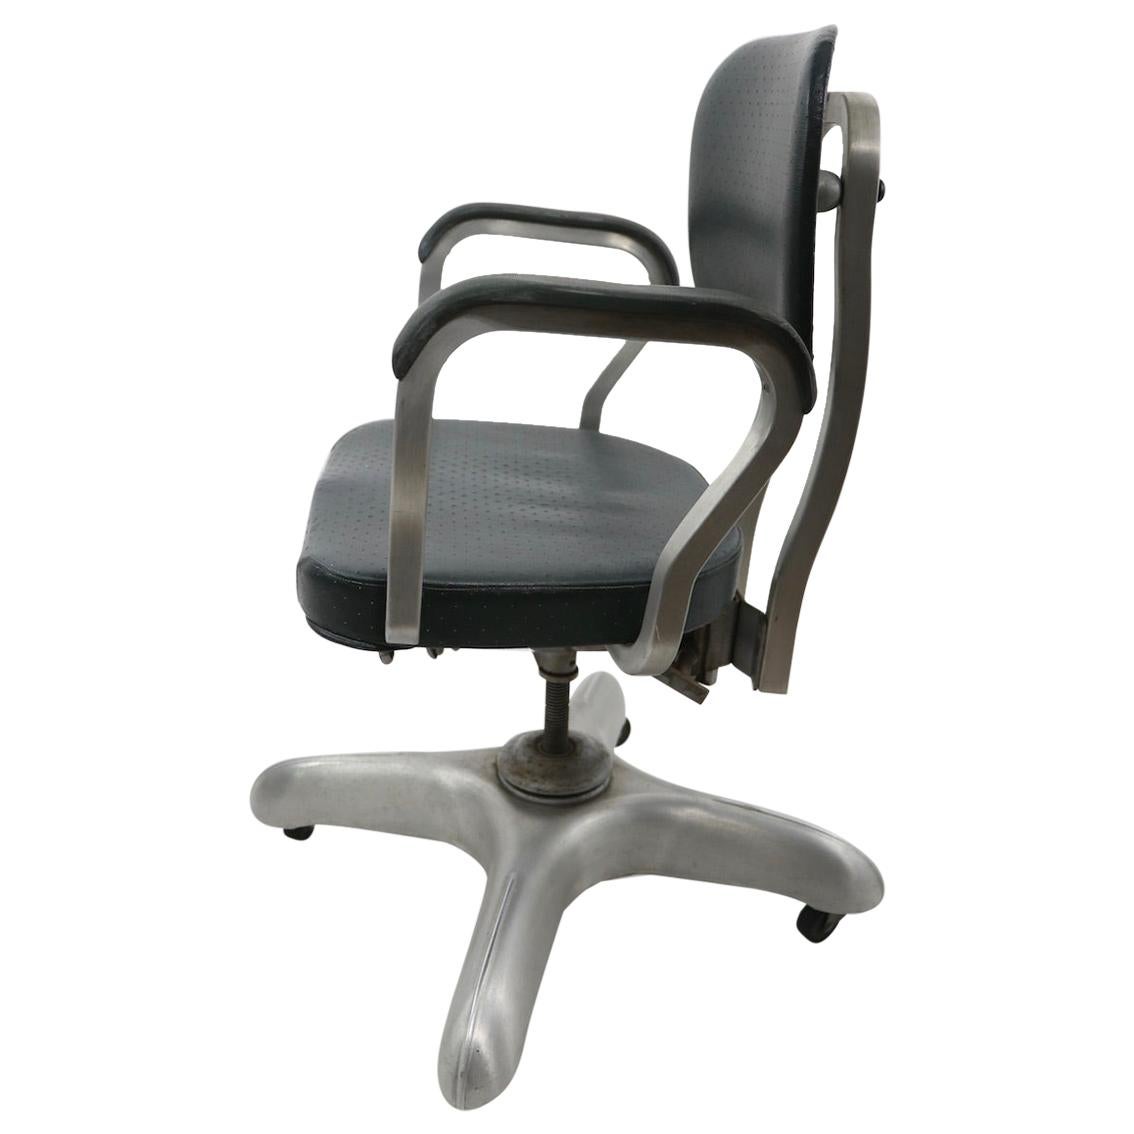 Swivel Tilt Office Desk Chair by the Good Form General Fireproofing Company